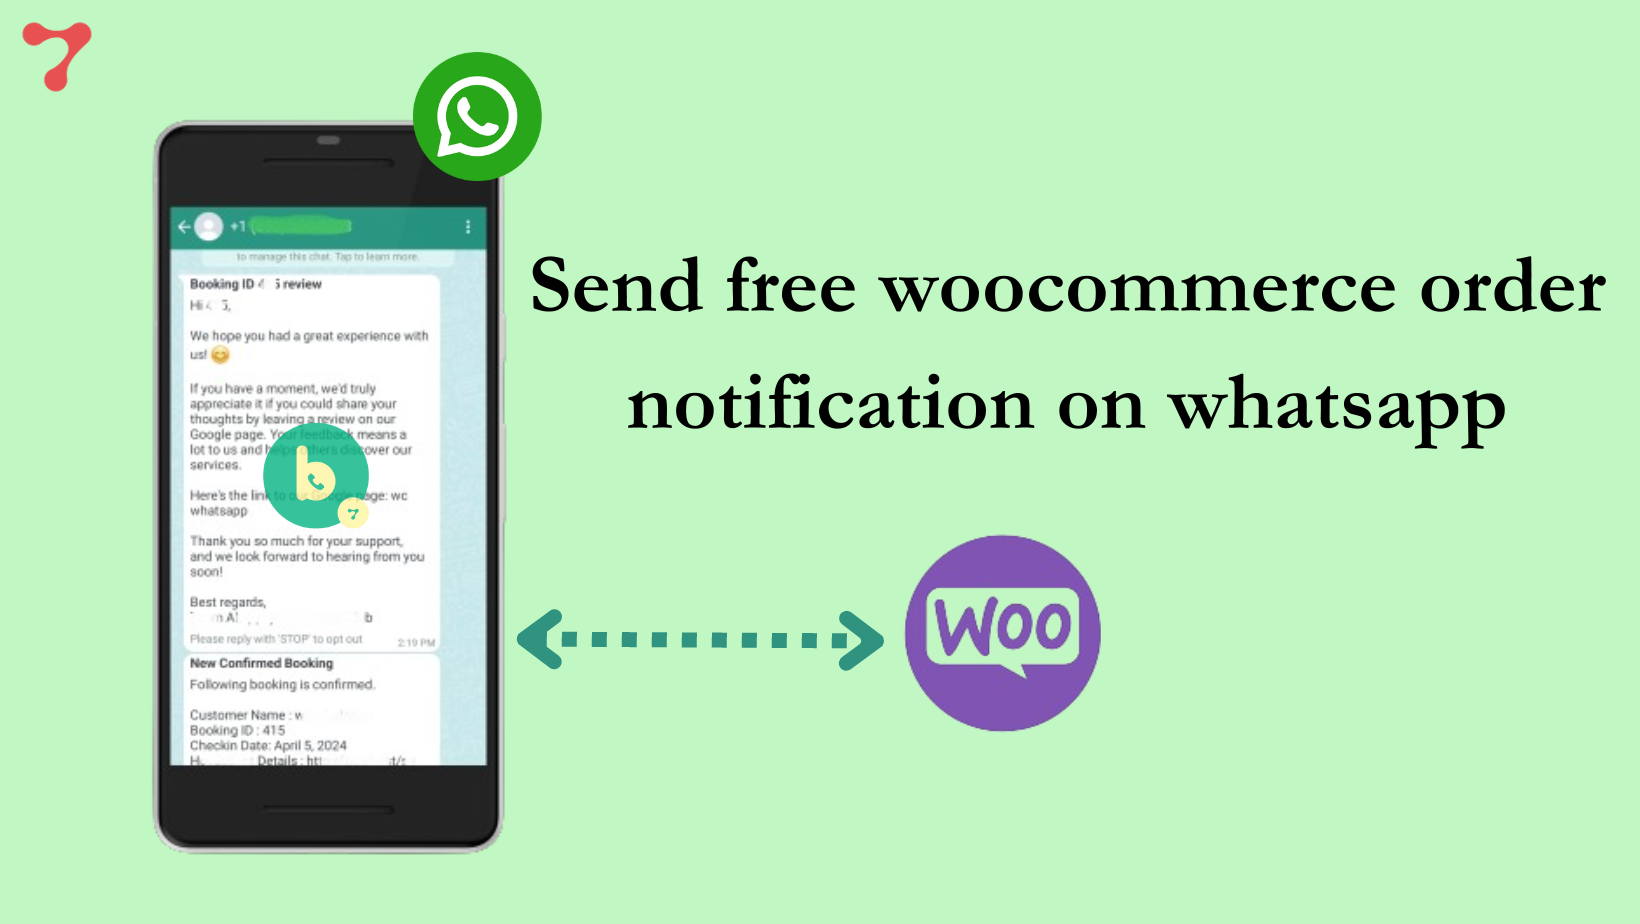 How to Send Free Woocommerce Order Notification on WhatsApp